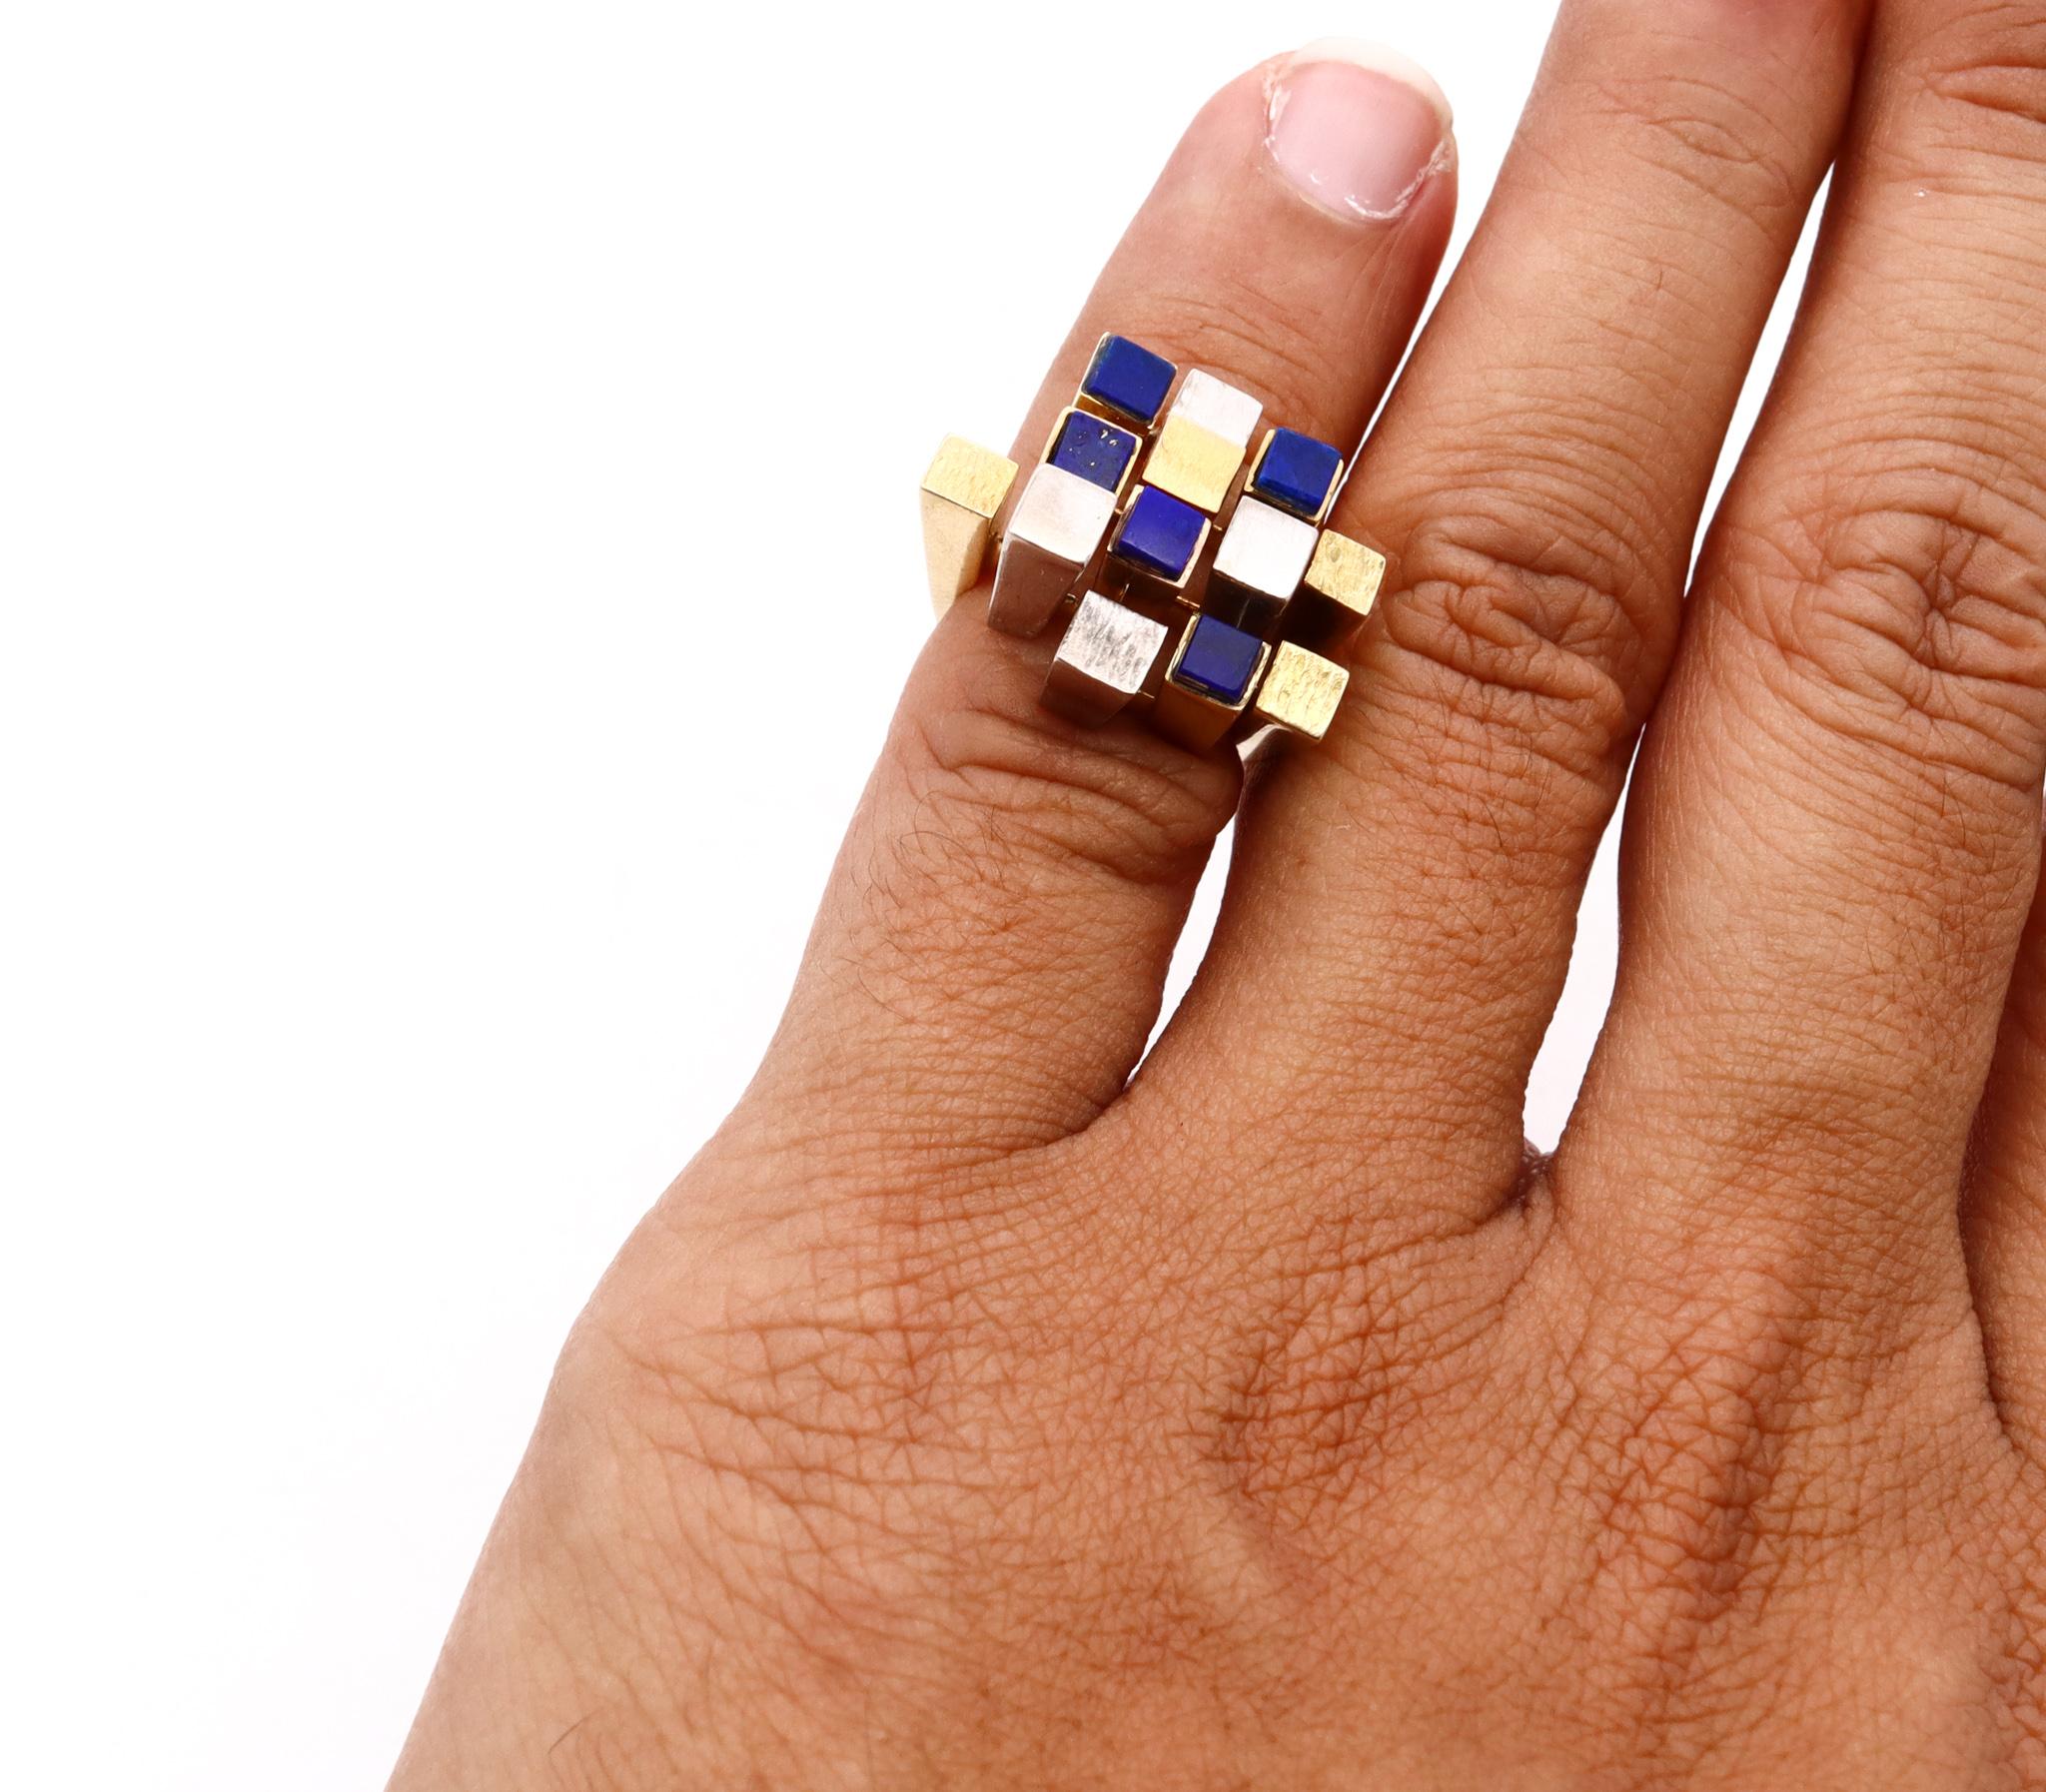 Rare geometric cocktail ring designed by Cartier.

An important and historical piece created in New York city, back in the late 1960's. Designed as a wearable cubism little sculpture, with an interesting pattern of volumetric elements. It was